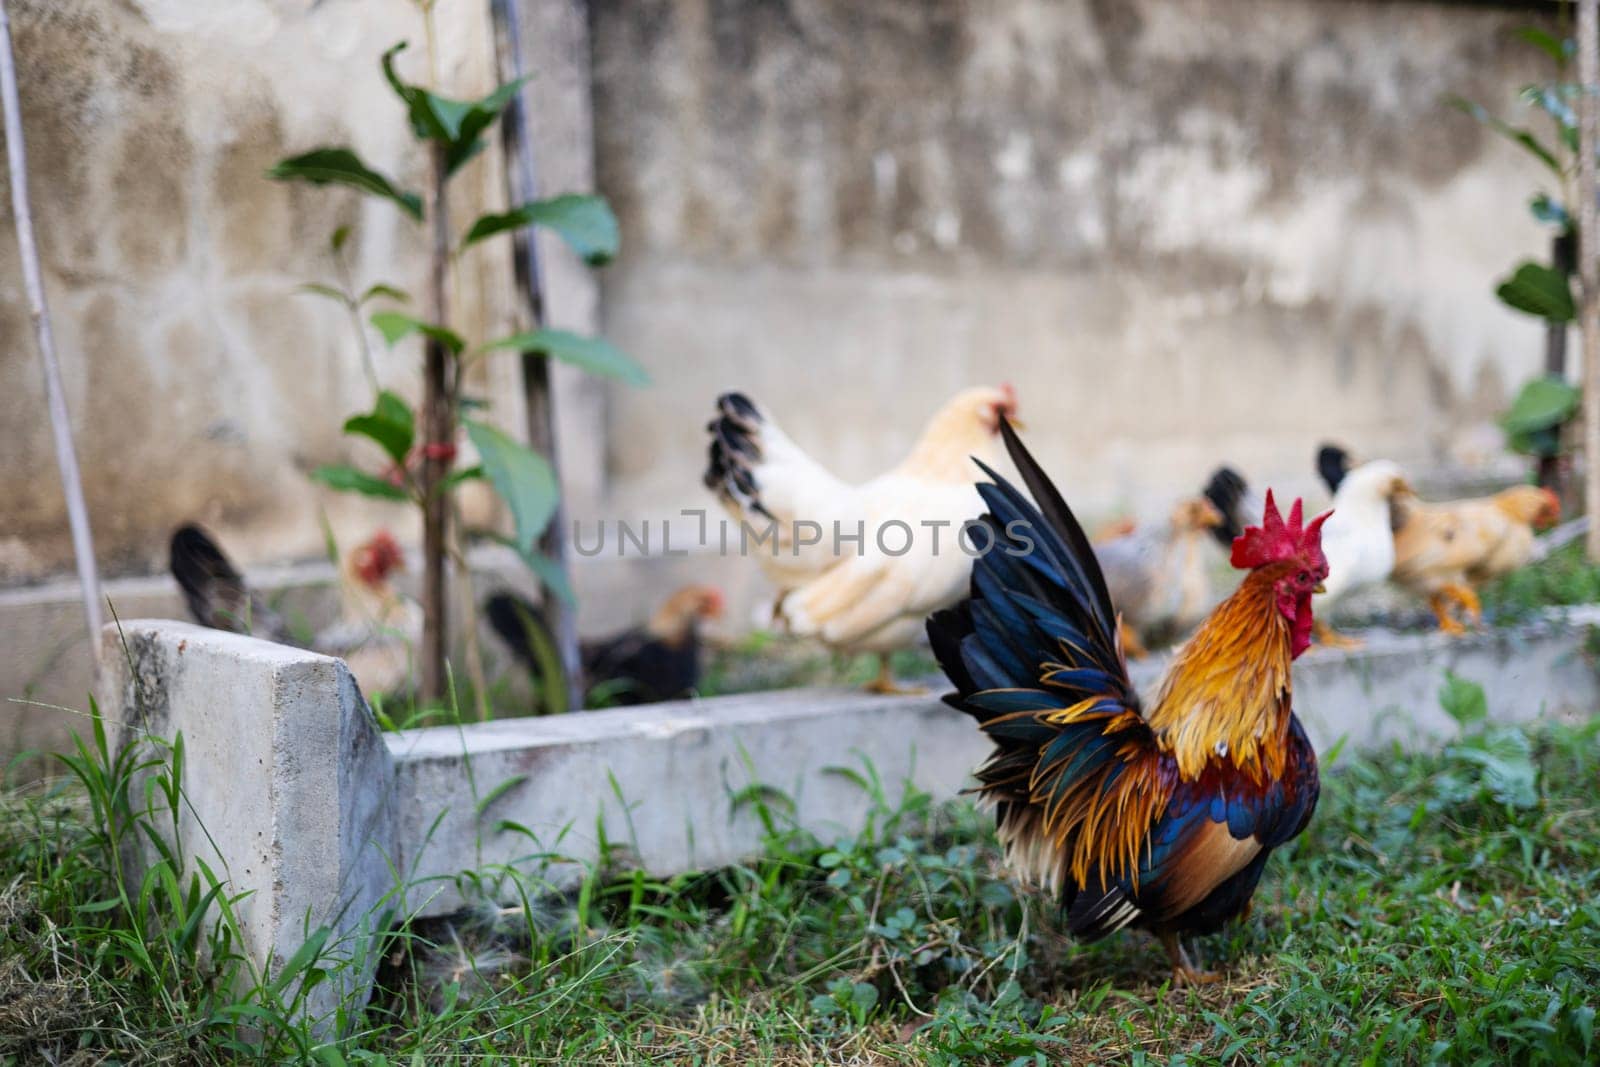 Chickens and rooster on a farm. Rooster and chickens grazing in the chicken farm. Rooster and his hen. Colorful rooster and chickens.